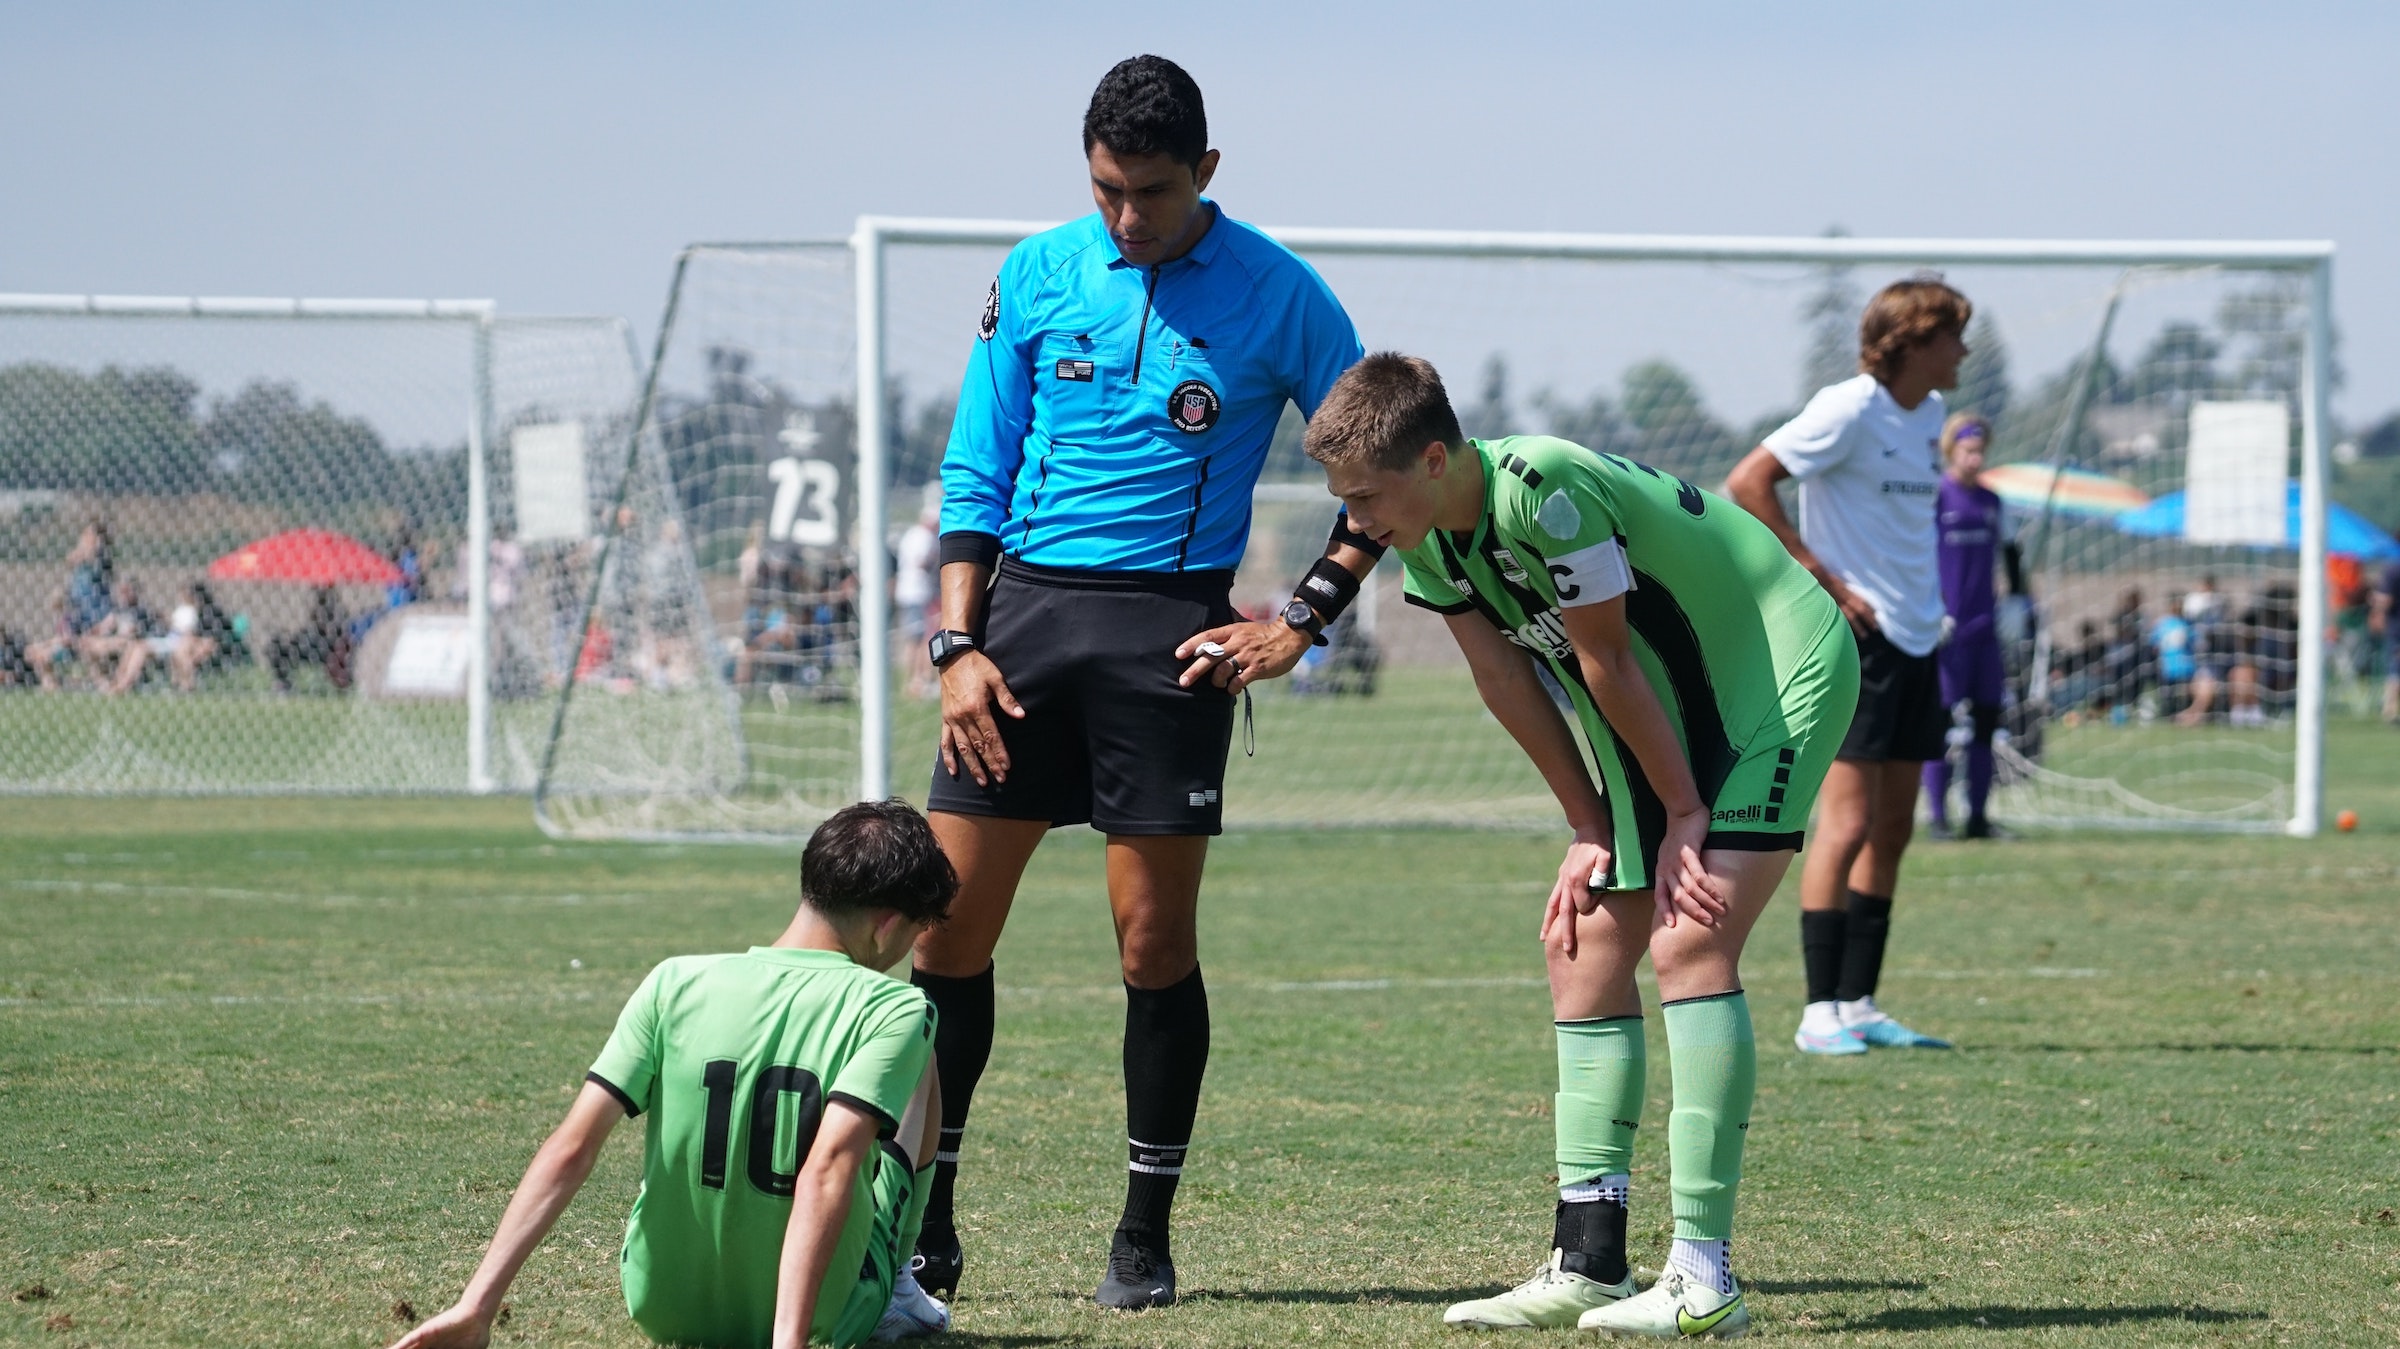 A Youth Soccer Coach’s View of a Good Ref